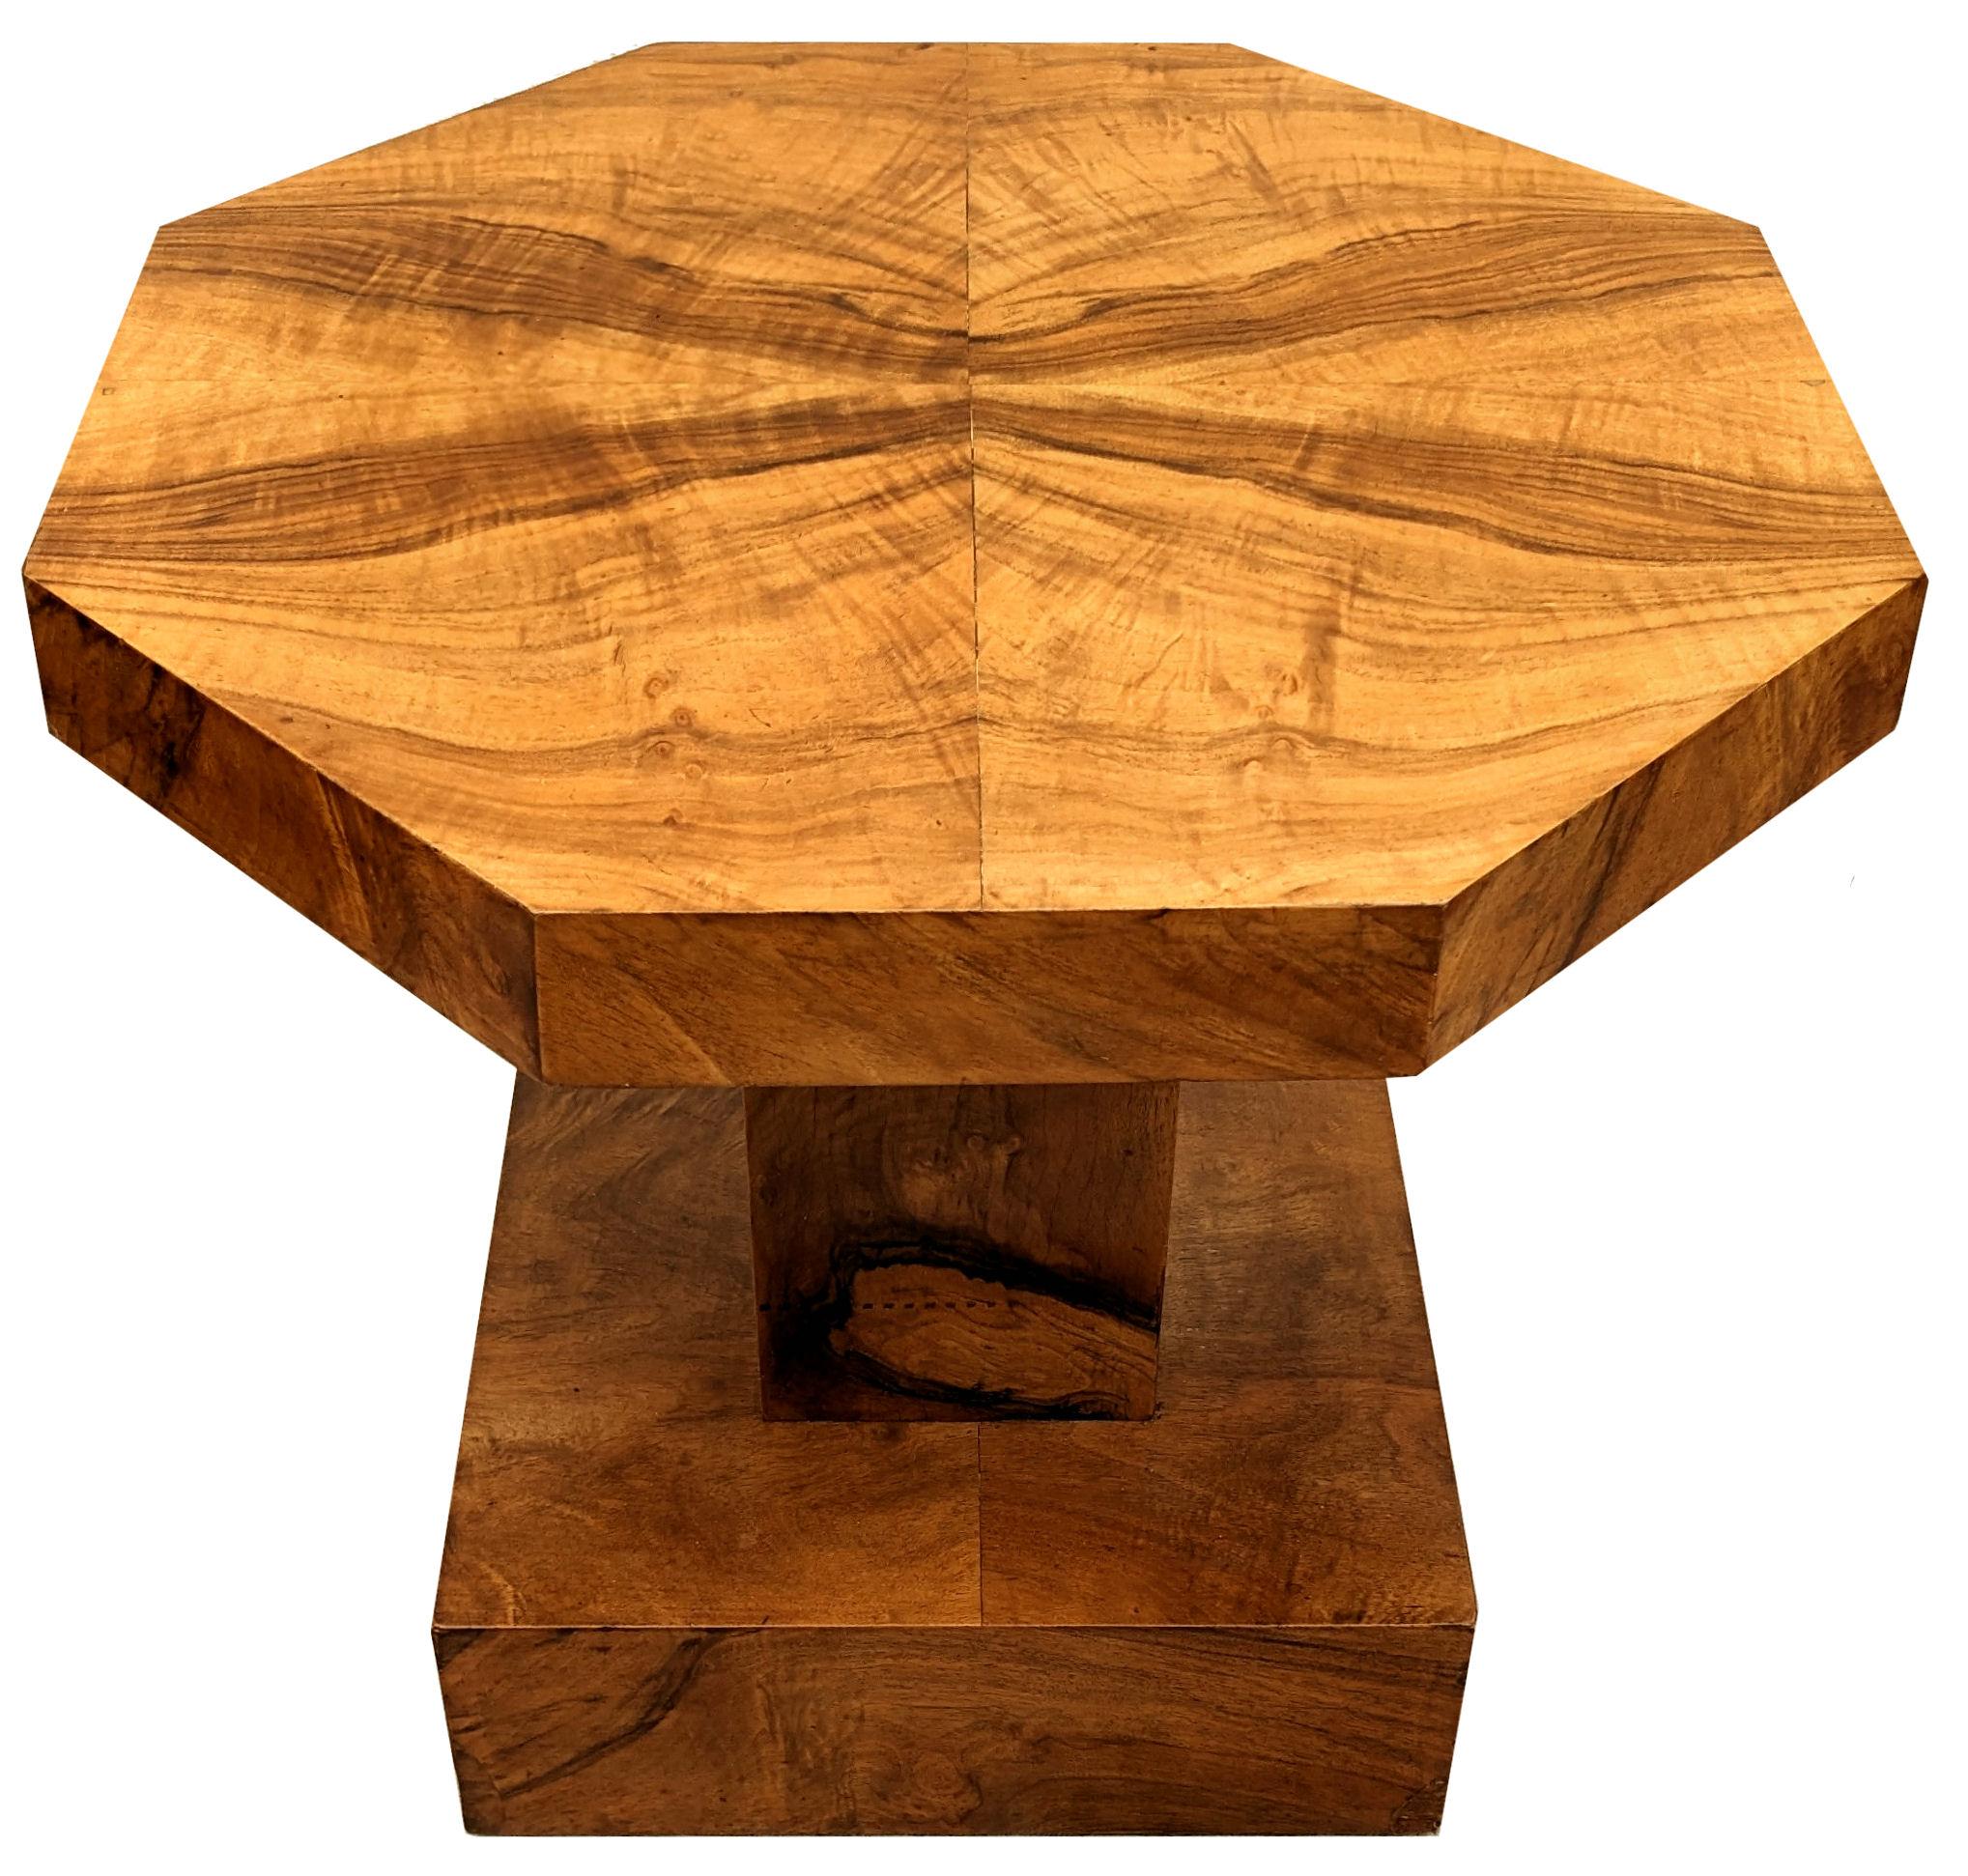 Polished Art Deco Figured Walnut Occasional Table, English, c1930 For Sale